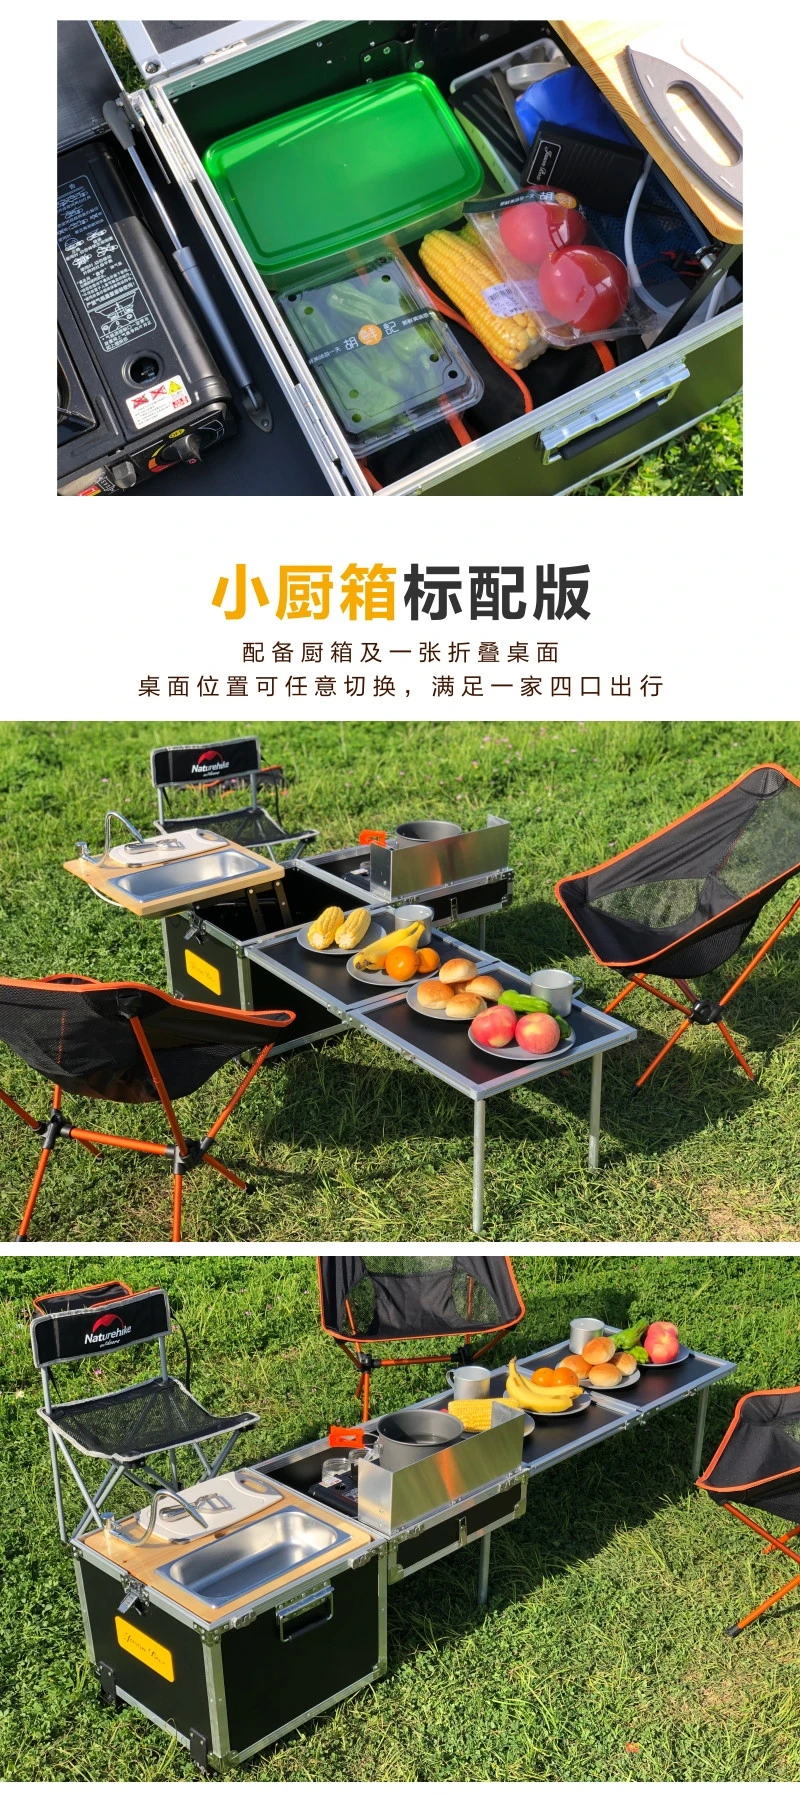 JIMEI portable picnic camping table campmate kitchen